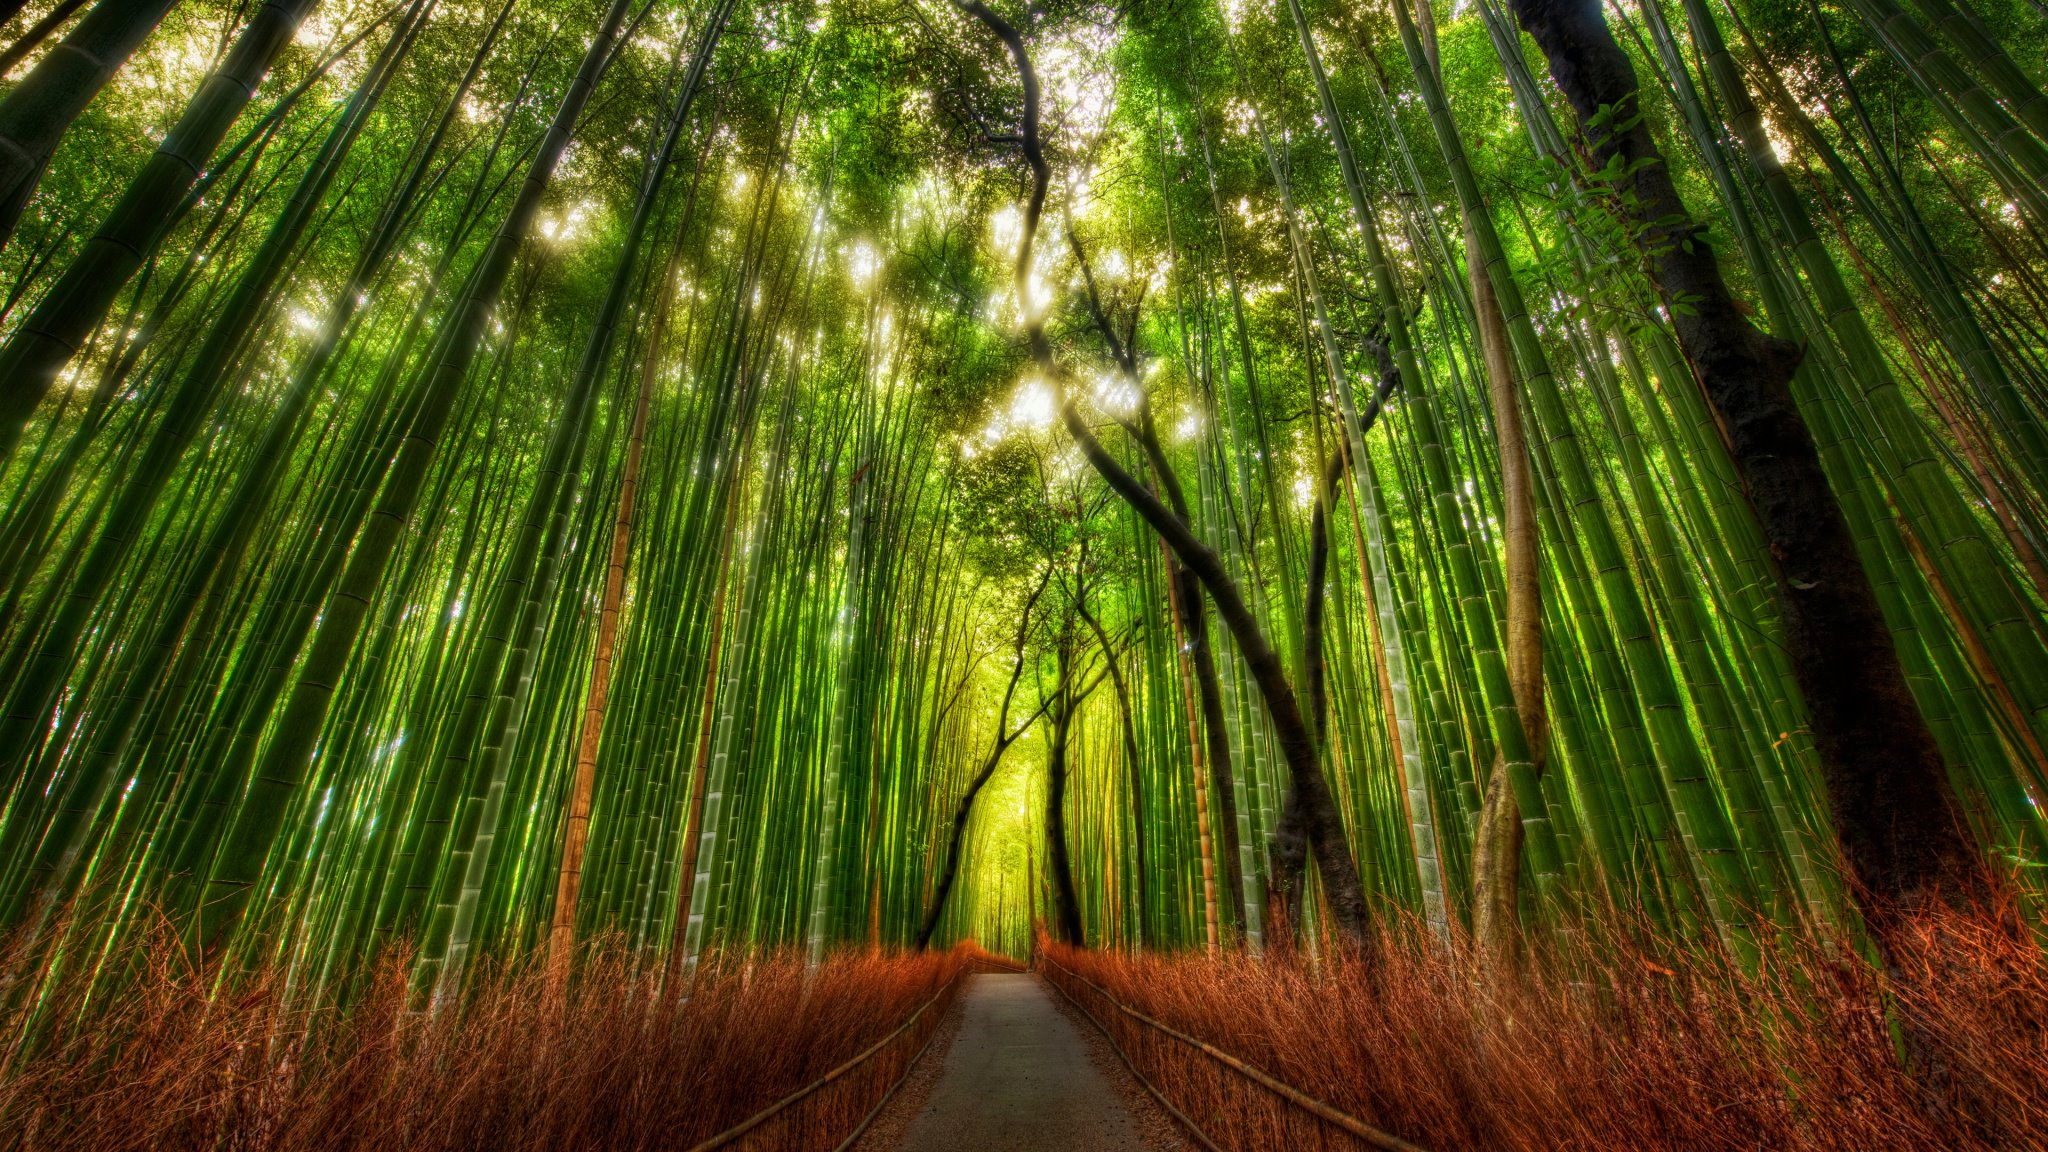 Bamboo Forest Kyoto Japan Desktop Wallpaper HD For Mobile iPhone Pc